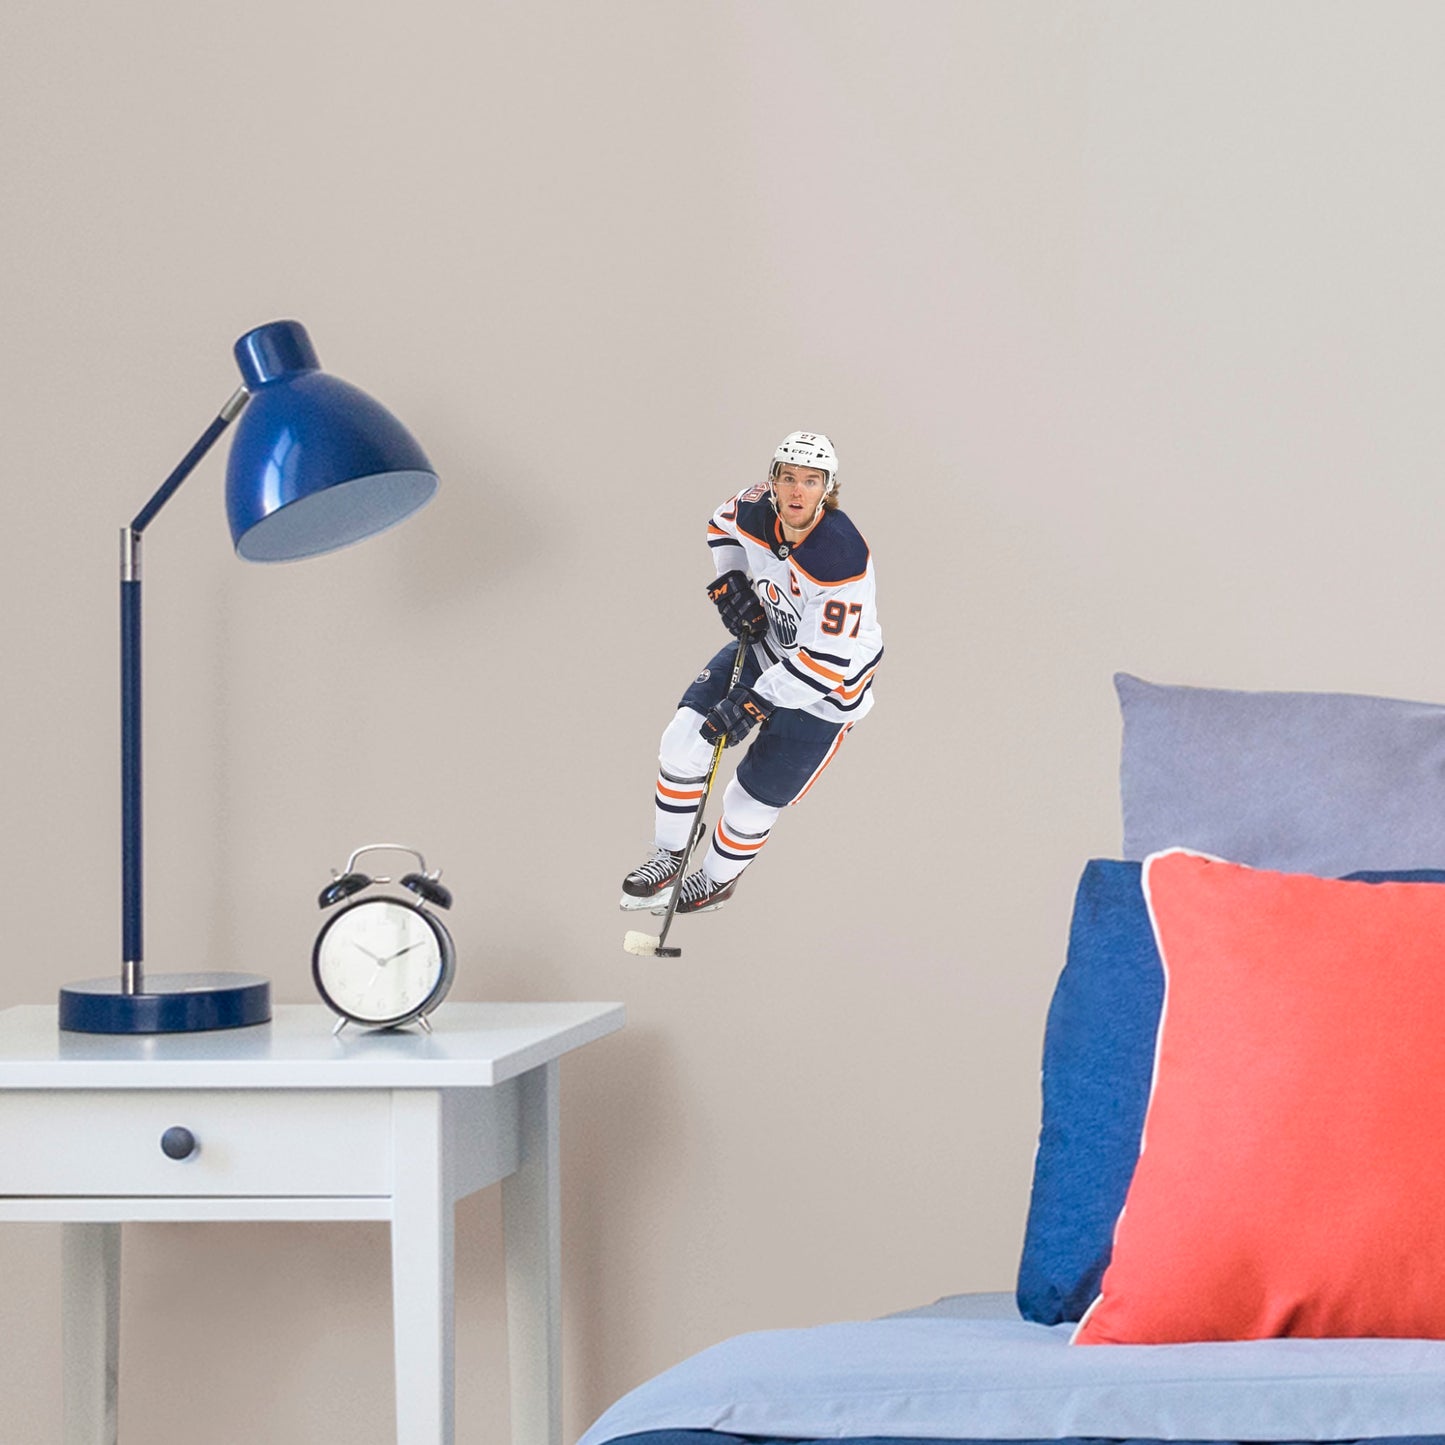 Large Athlete + 2 Team Decals (8"W x 17"H) Widely considered to be among the best NHL players in the world, Edmonton Oilers centre and team captain Connor McDavid has cemented himself as a high-caliber player for the Oilers. Affectionately referred to as "Connor McSaviour" and the "Canadian Super Promise," this officially licensed NHL wall decal depicts the full frame of the Edmonton Oiler's 2015 first overall draft pick in his Away uniform.